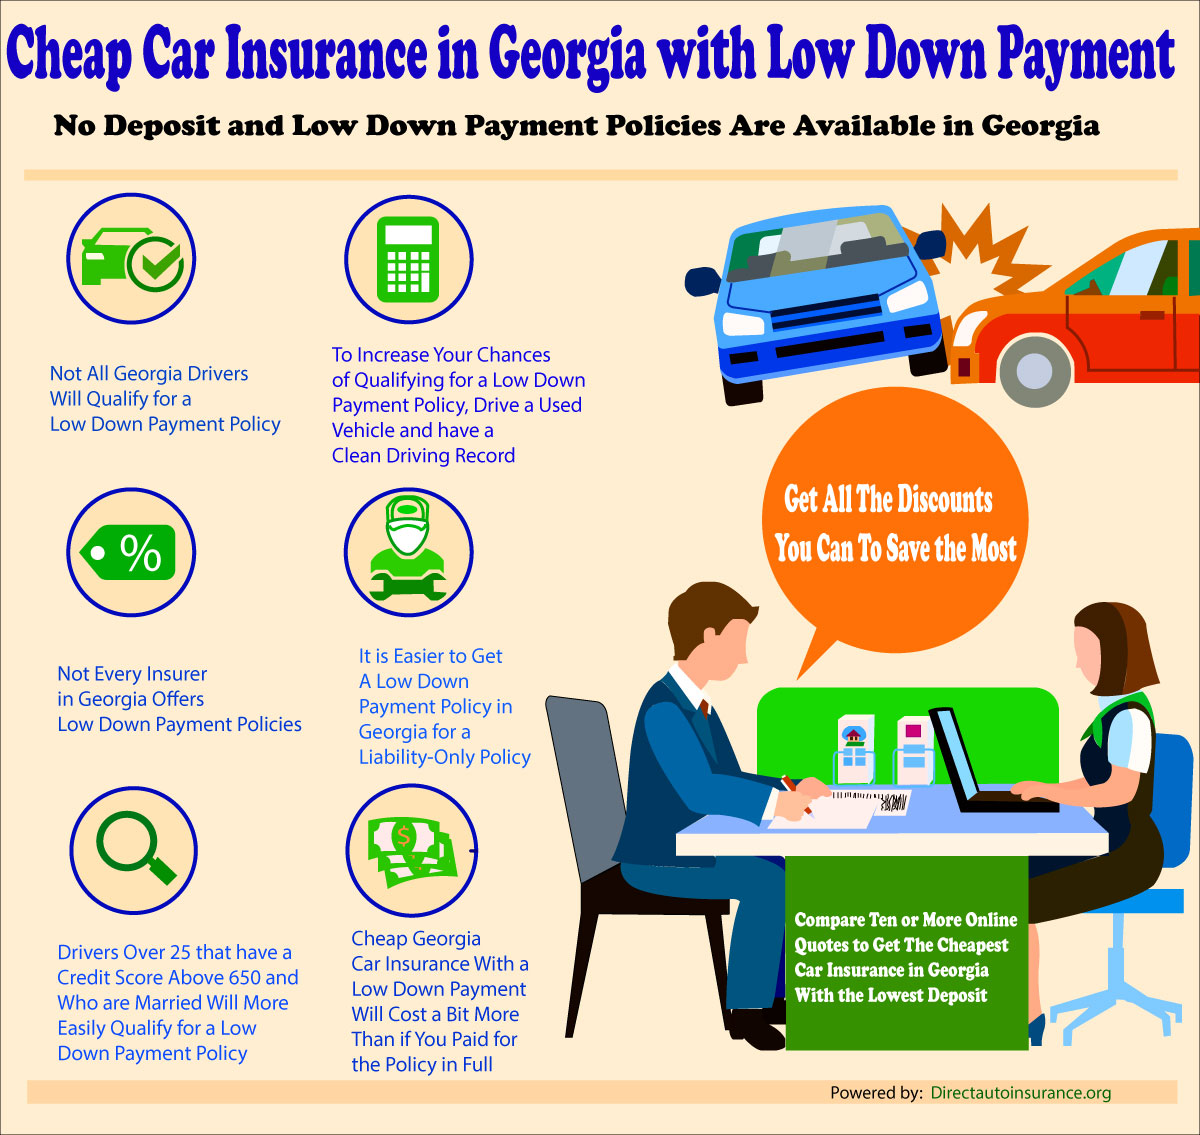 Cheap Car Insurance in Georgia with Low Down Payment